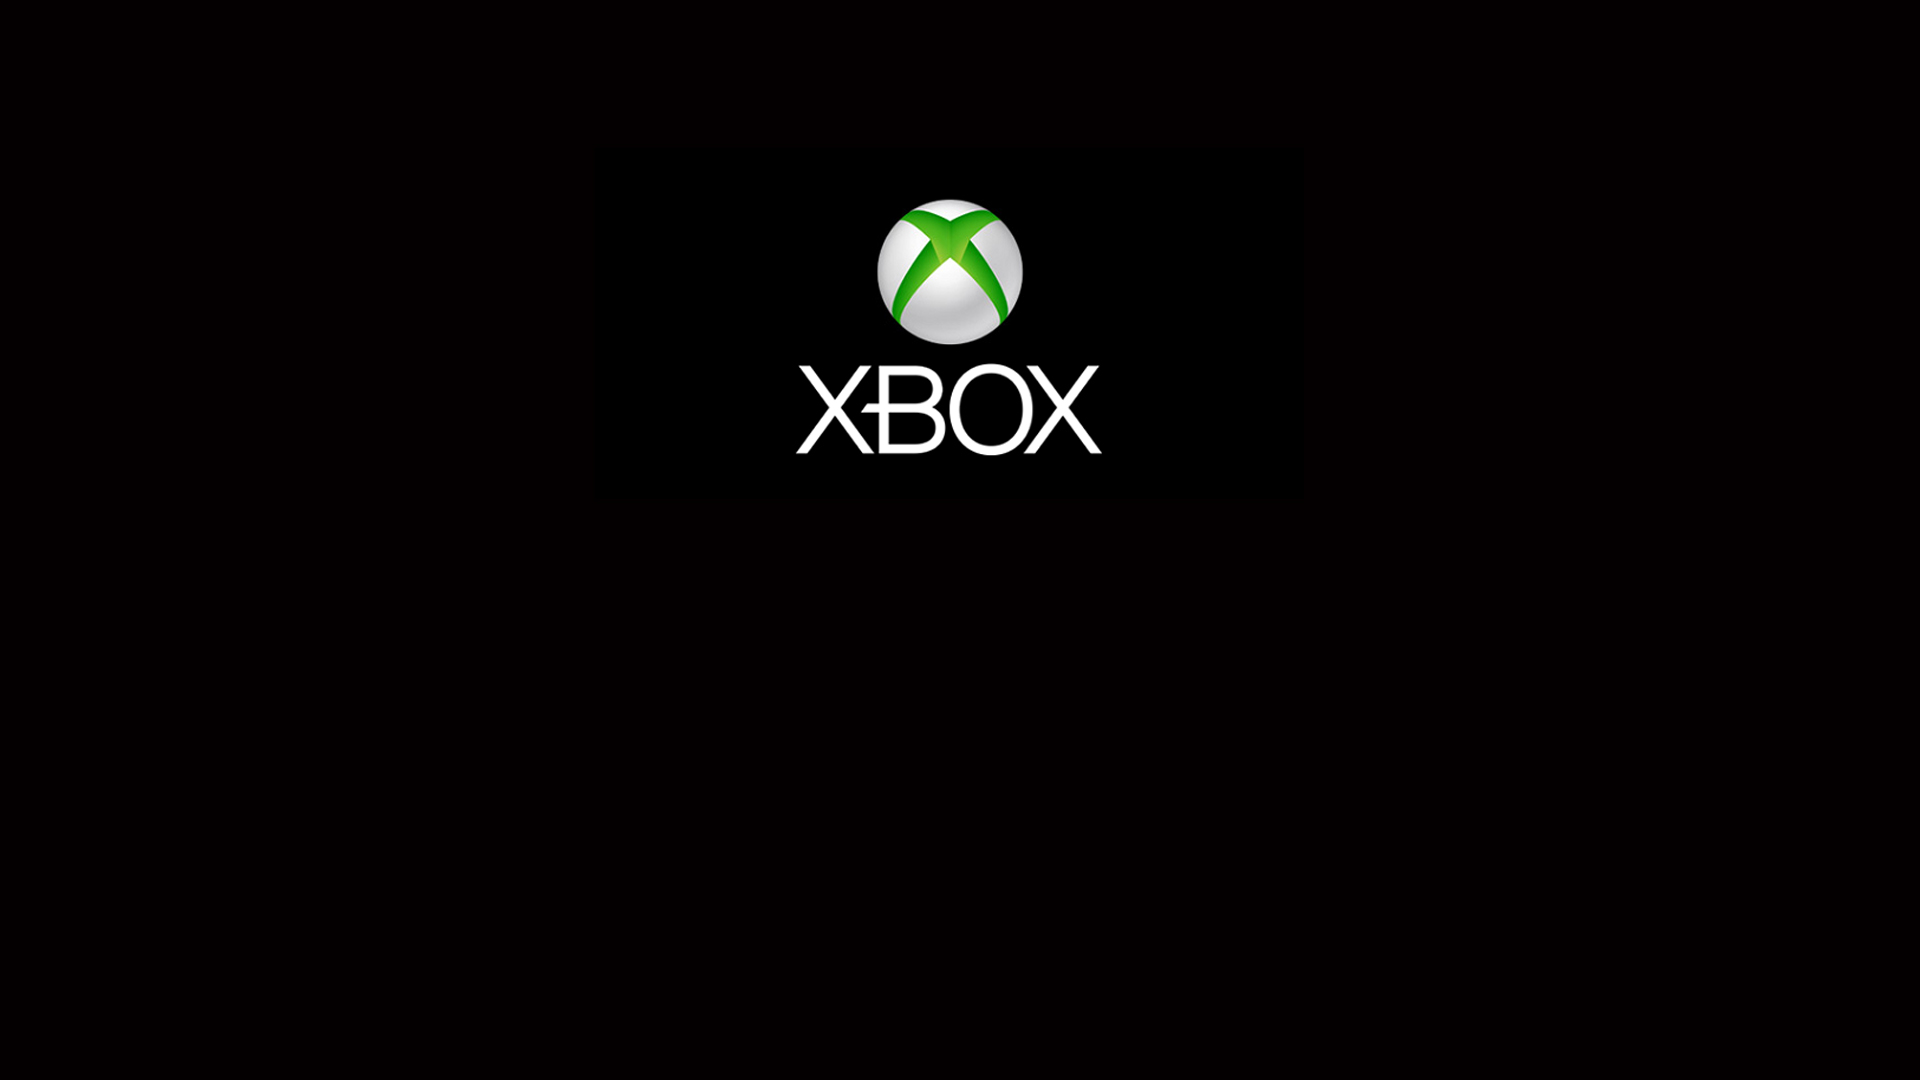 File Name 921138 HD Xbox Wallpapers Download   921138 1920x1080